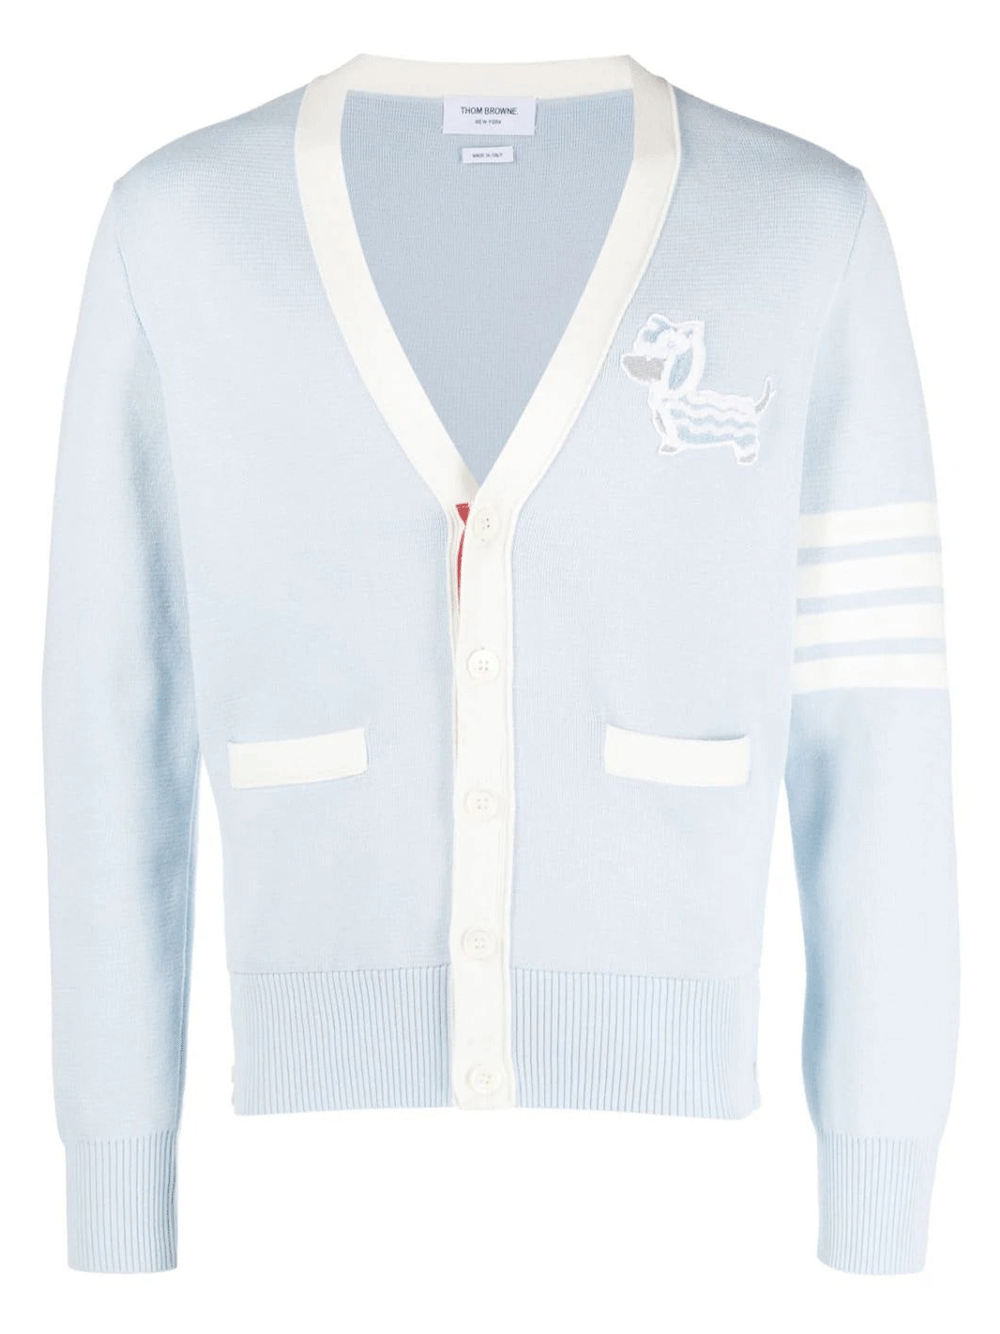 ThomBrowne-Chinese-New-Year-Hector-Motif-Cardigan-Light-Blue-1